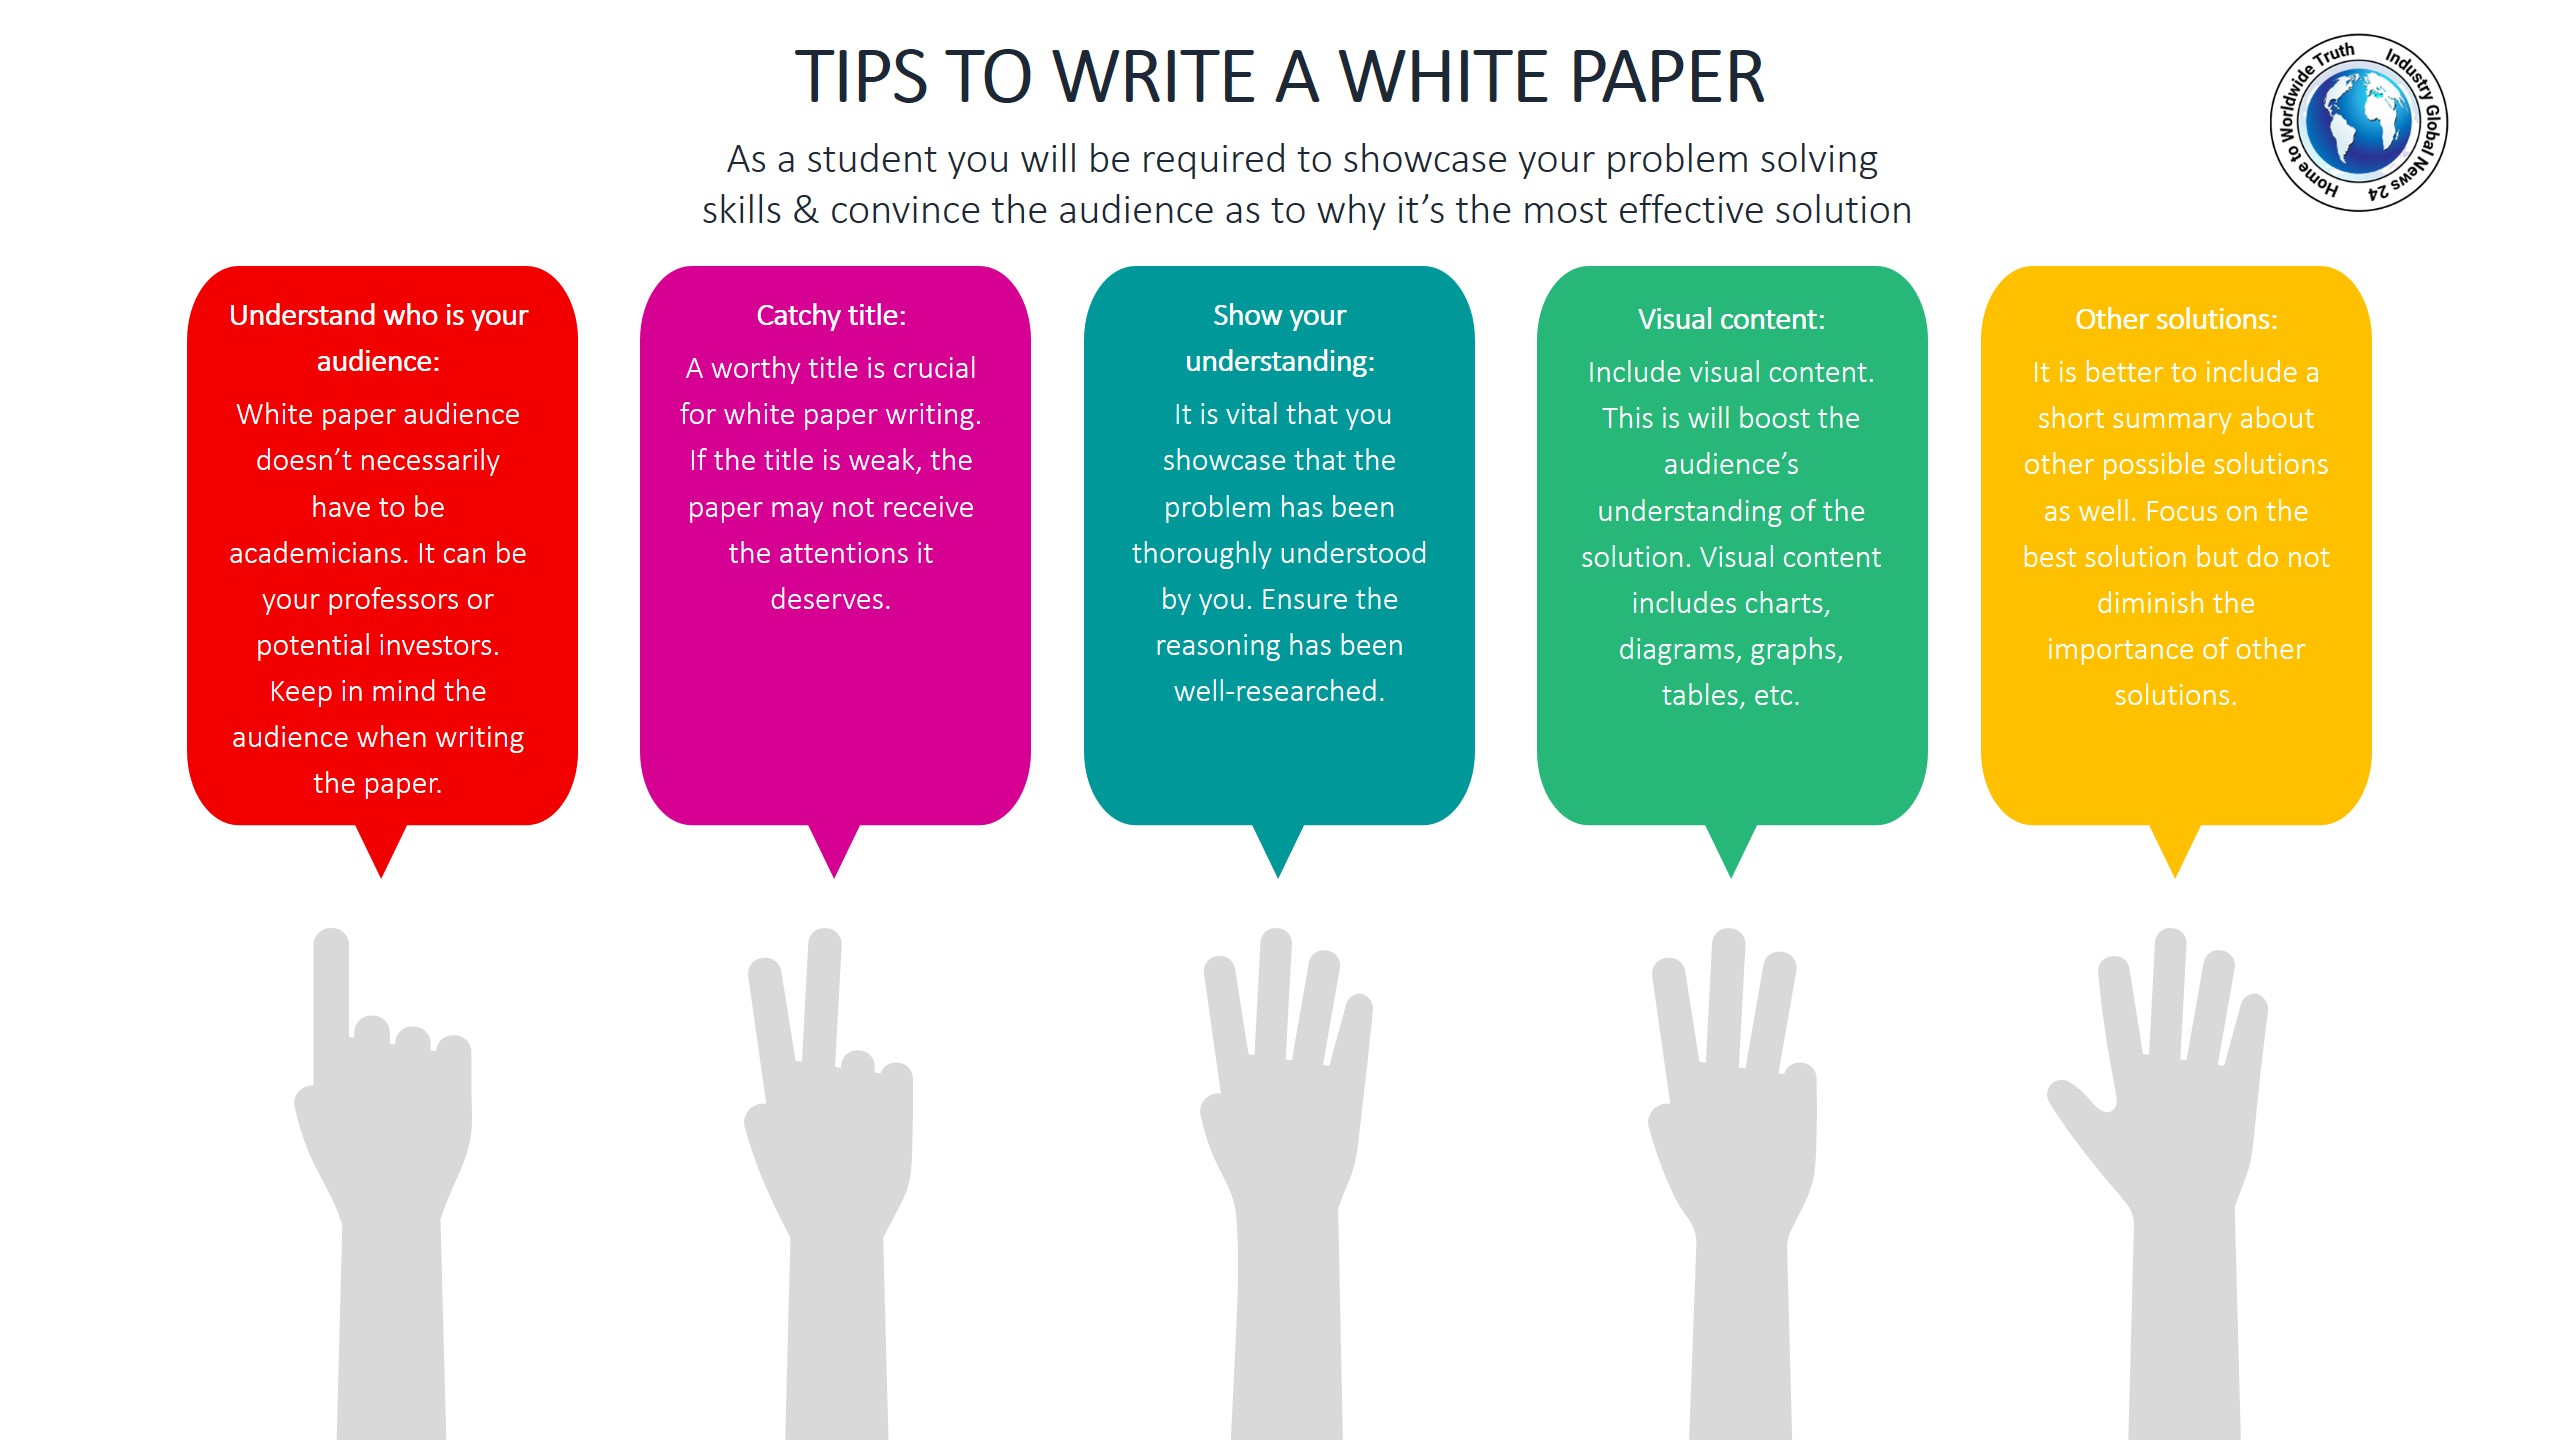 Tips to write a white paper